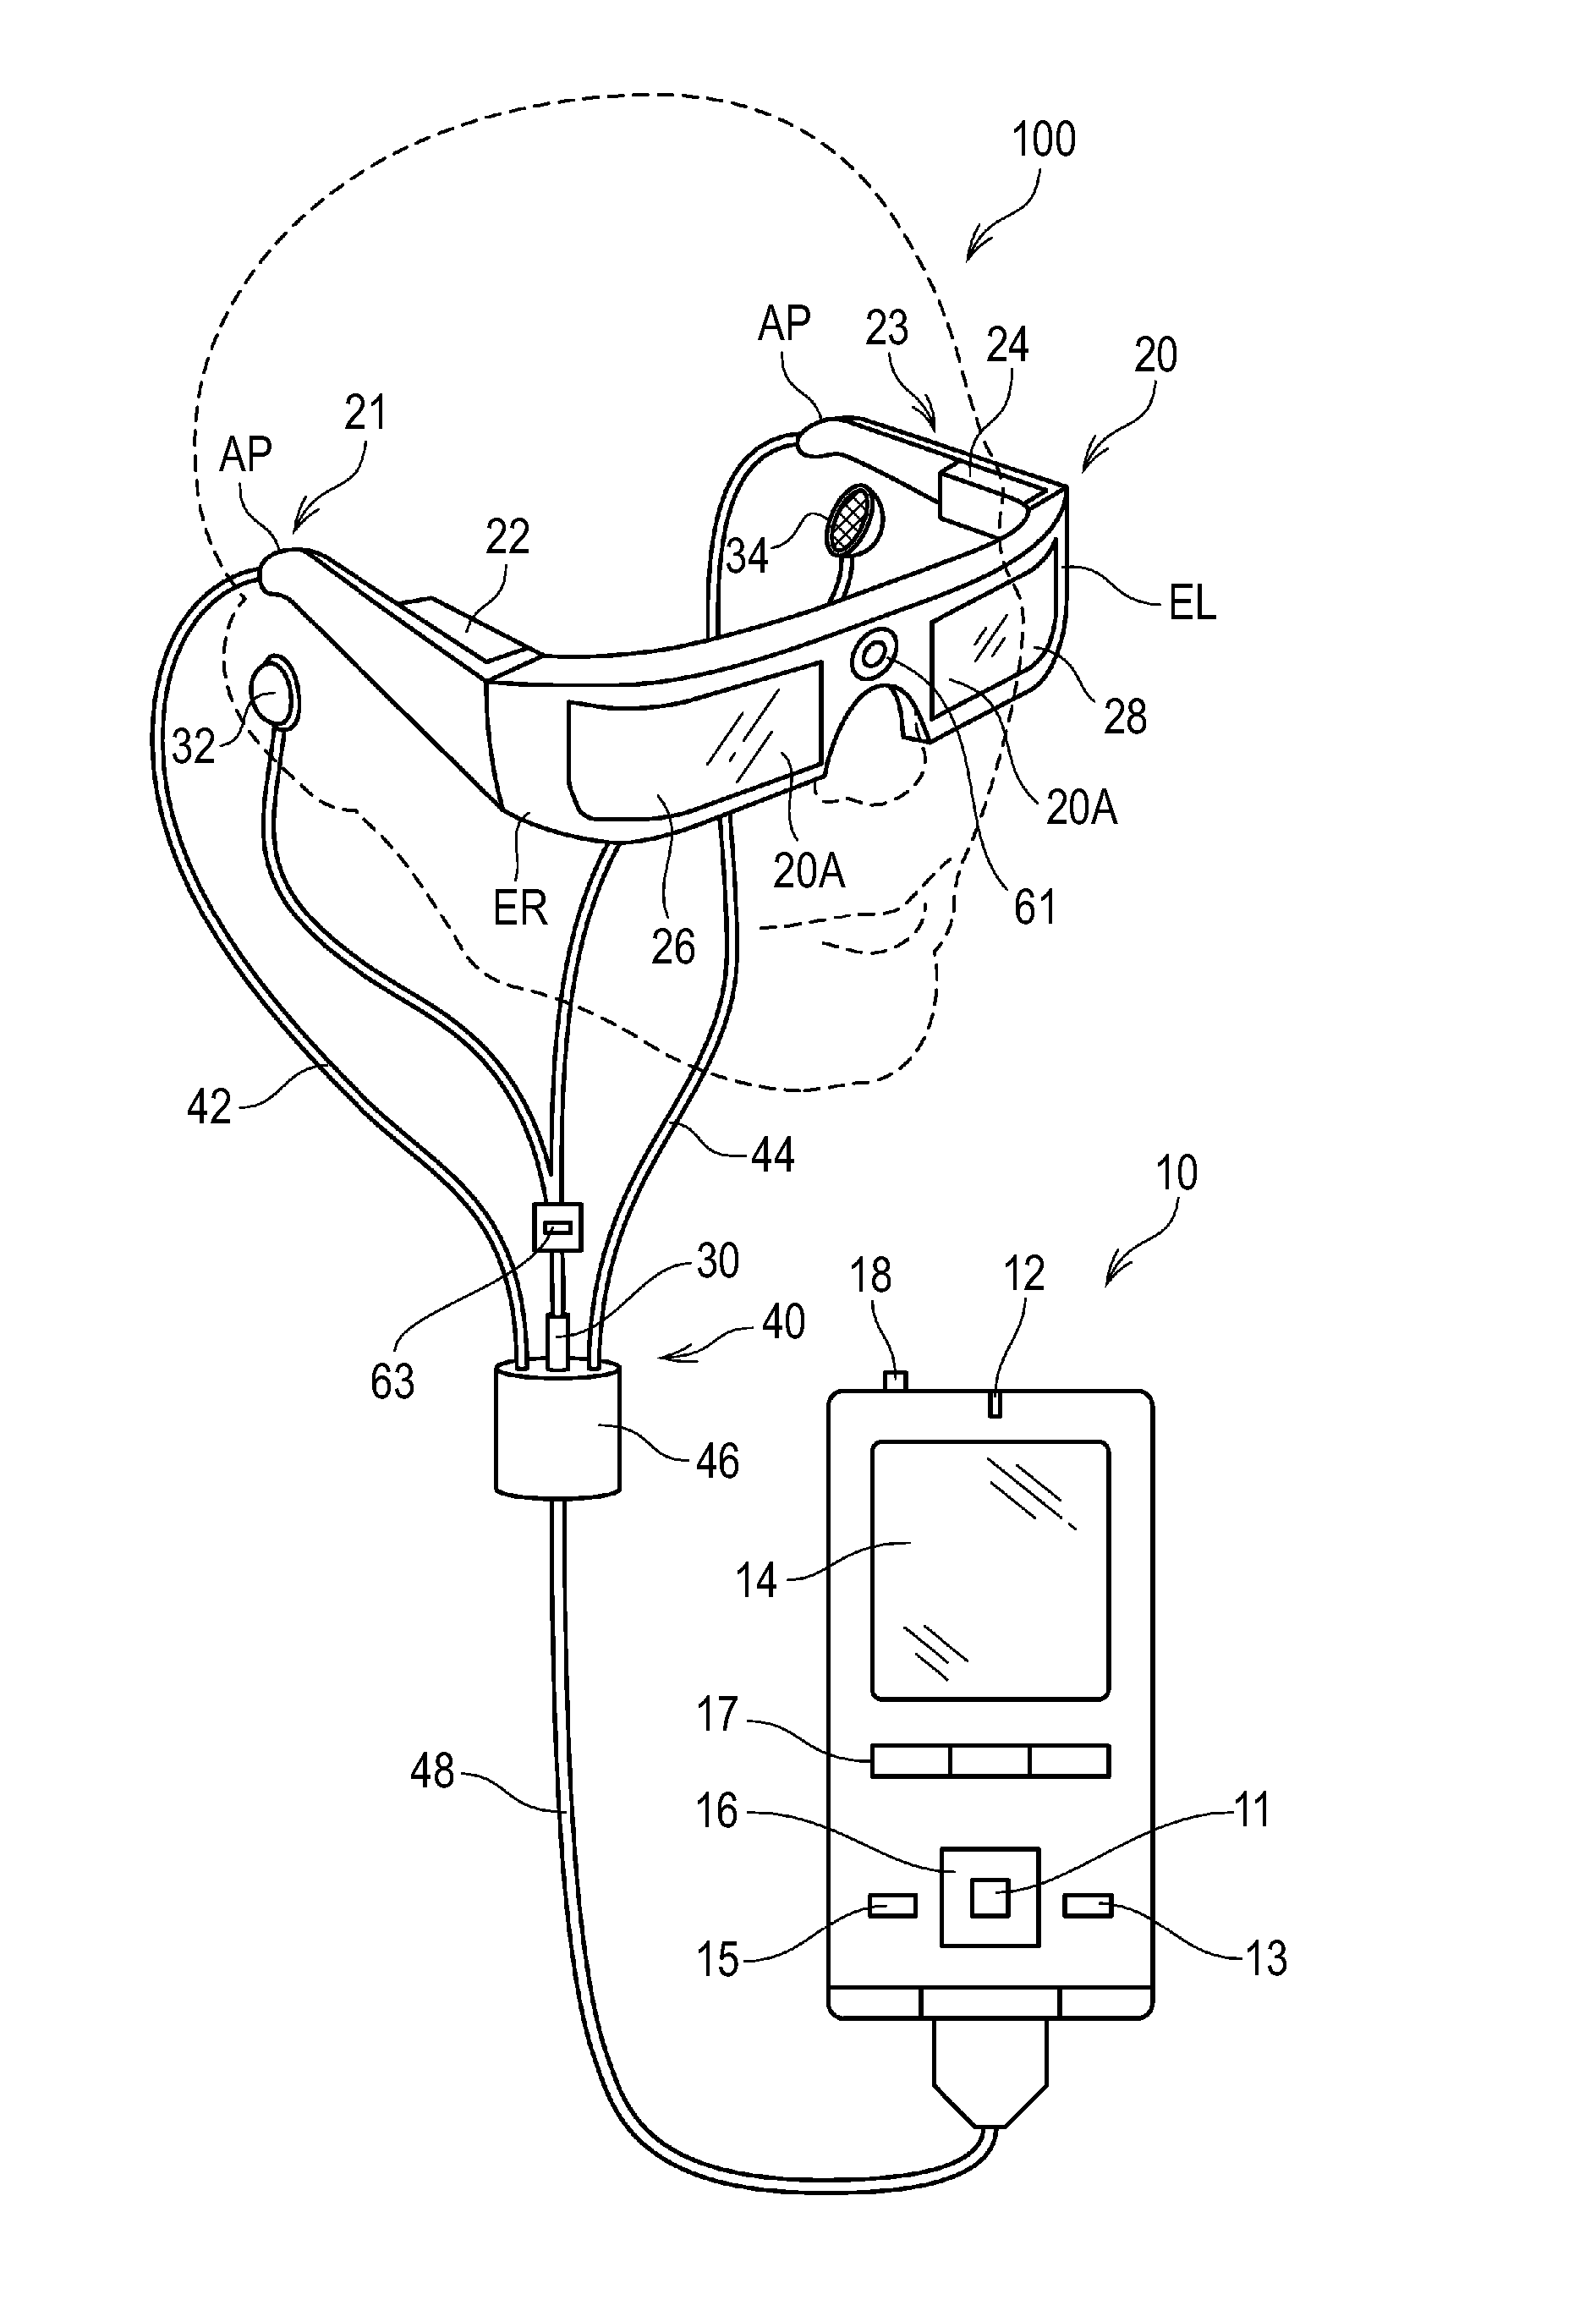 Display apparatus and method of controlling display apparatus